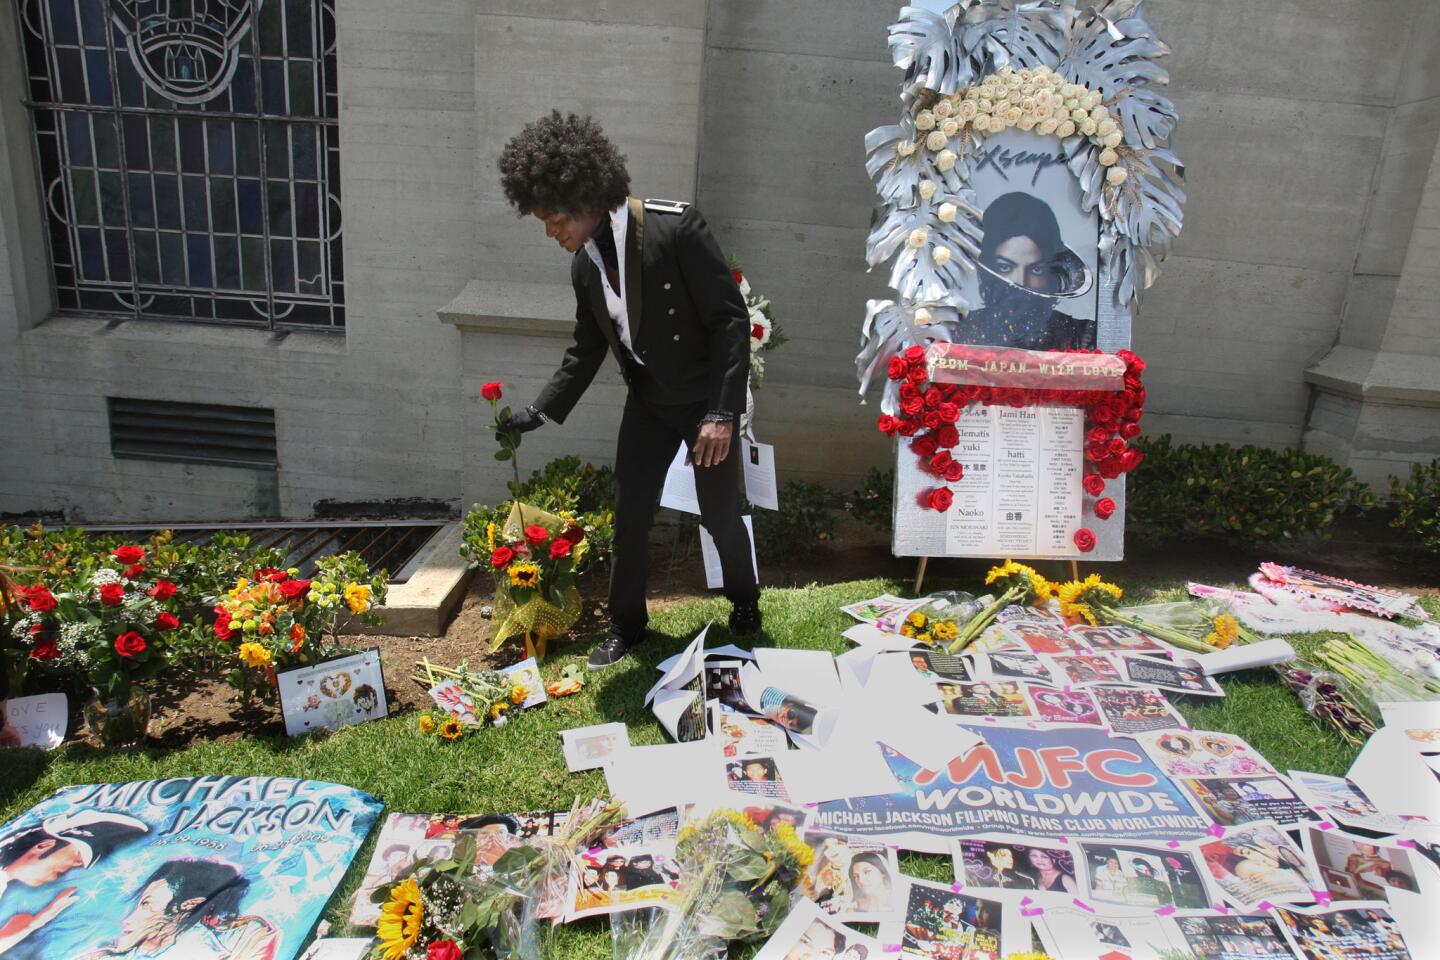 A man identified only as Jovan adjusts a flower at a memorial to Michael Jackson as fans gather at the Great Mausoleum at Forest Lawn Memorial Park on June 25 in Glendale.